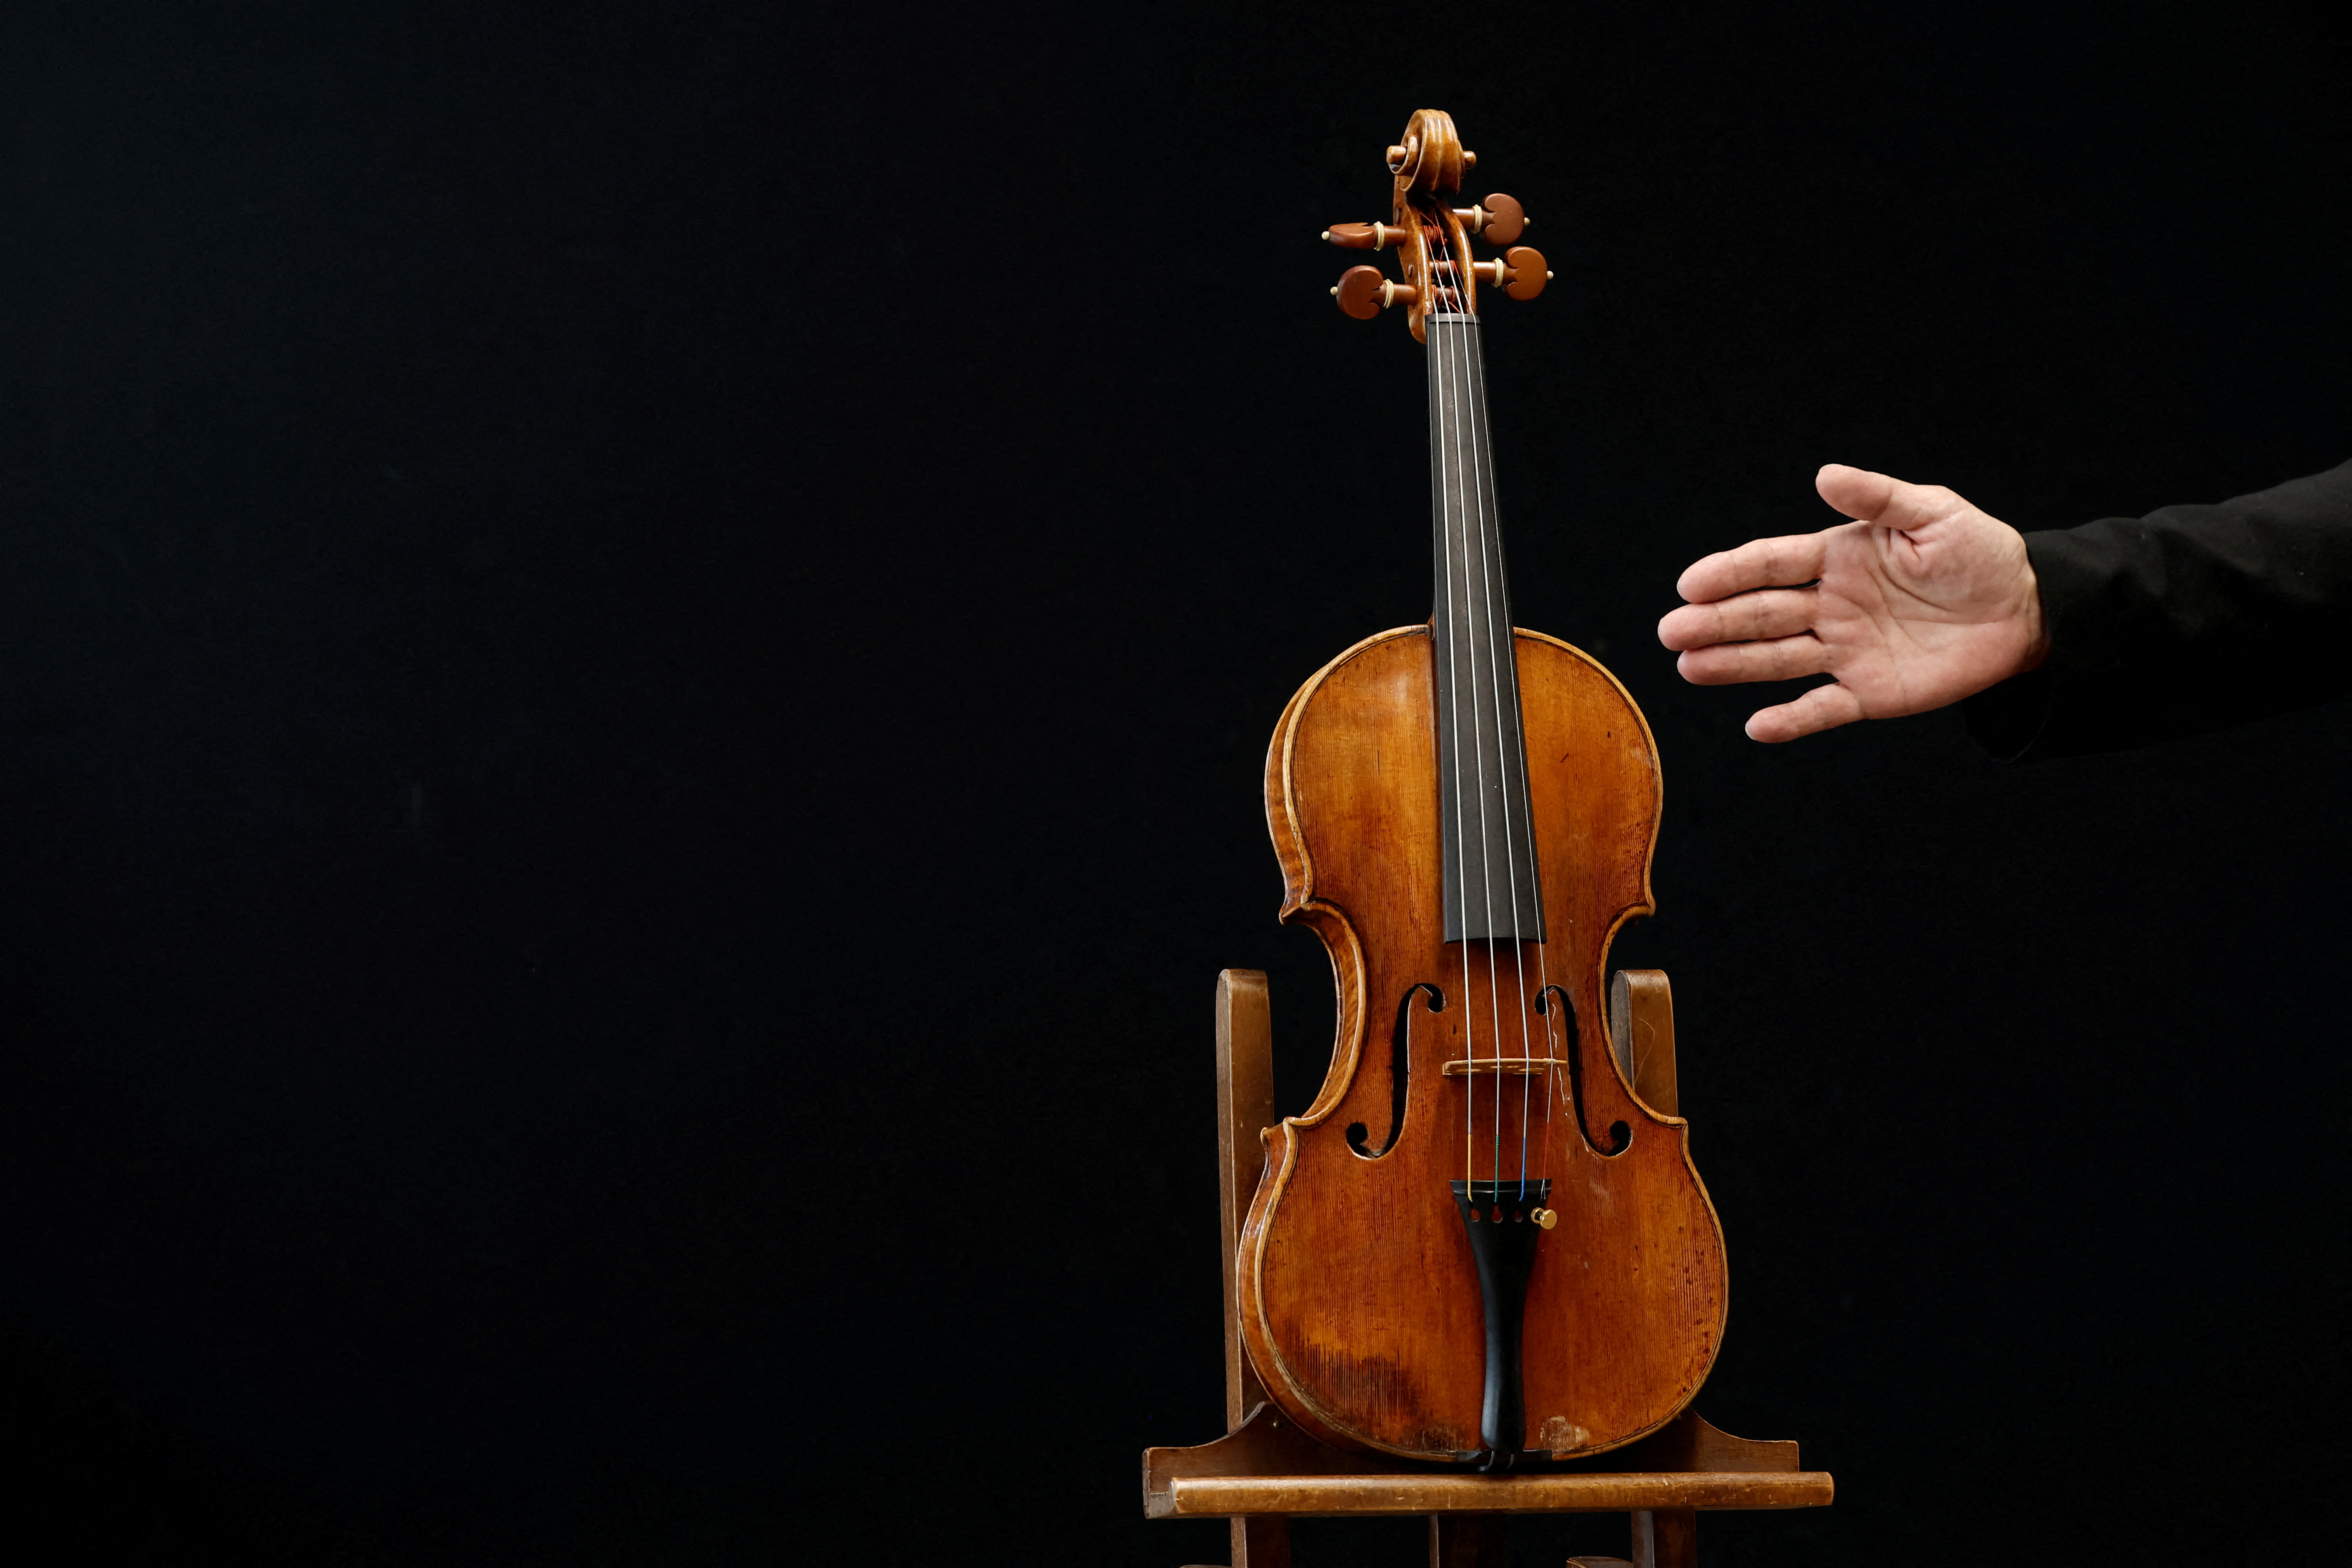 300-year-old violin to be auctioned in Paris